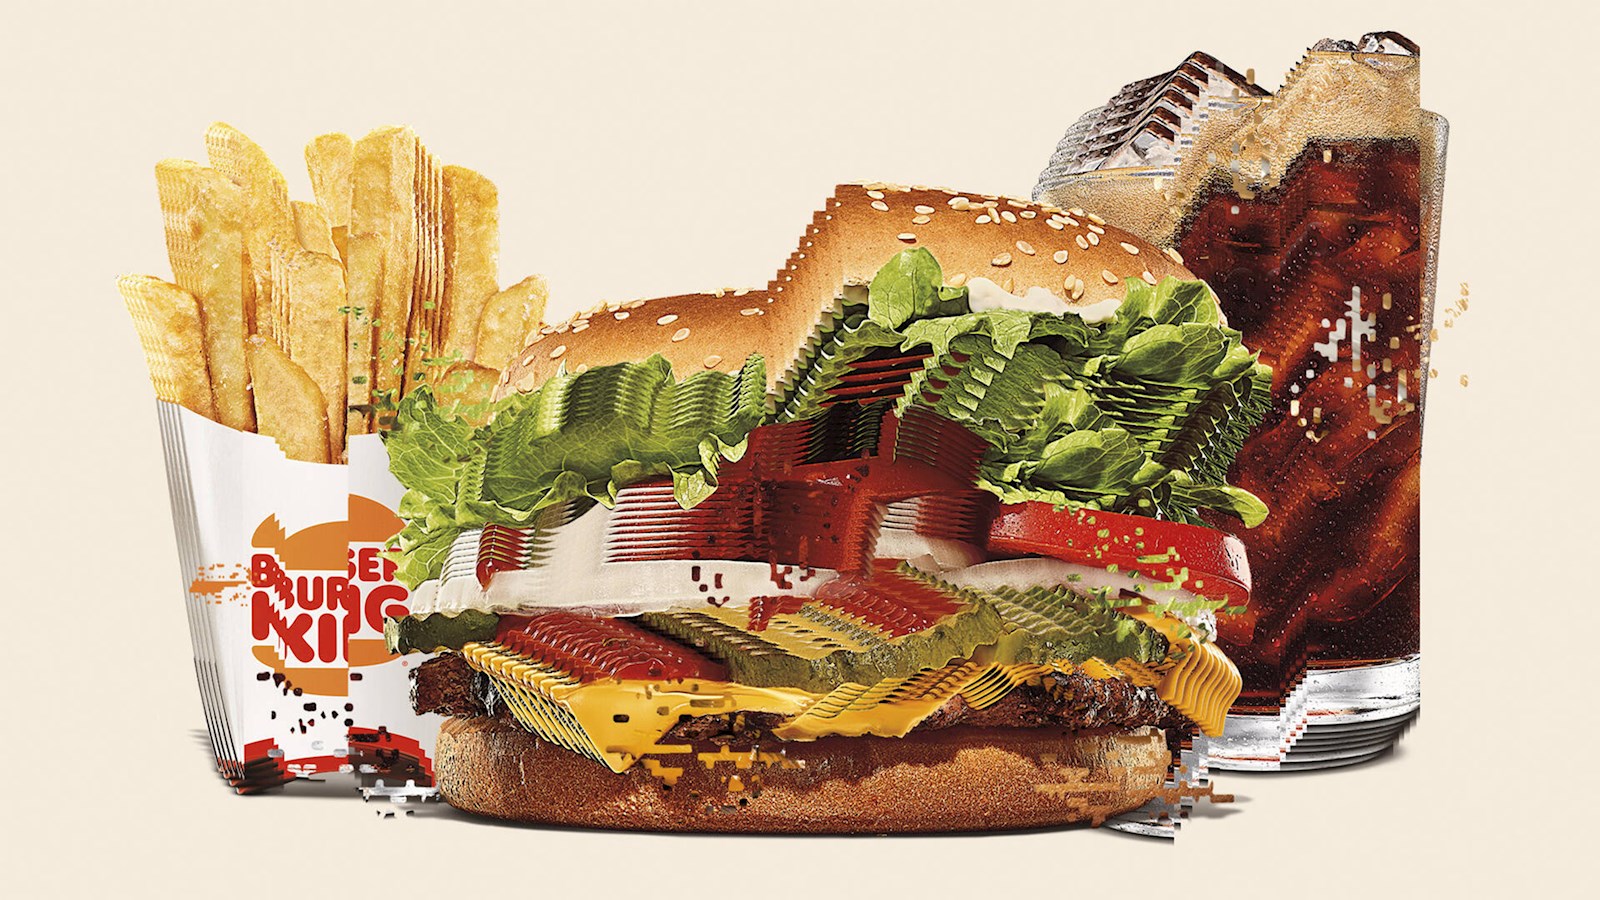 Glitched image of a Burger King meal